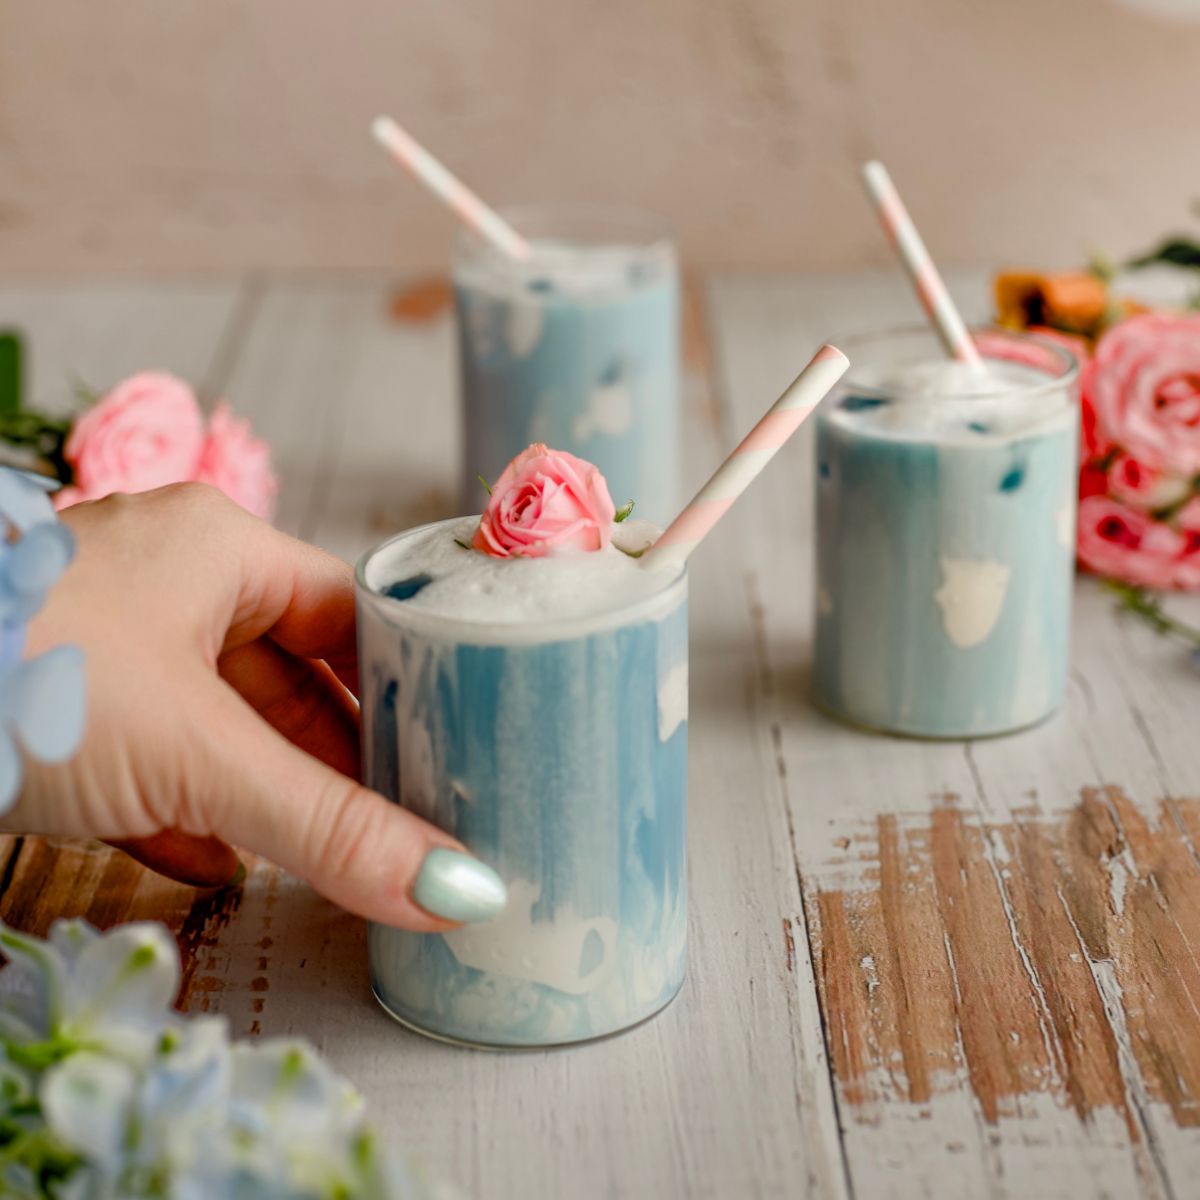 cover image butterfly pea flower latte close up womans hand holding blue latte with straw and pink rose bud as garnish with blue dress with butterfly sleeves